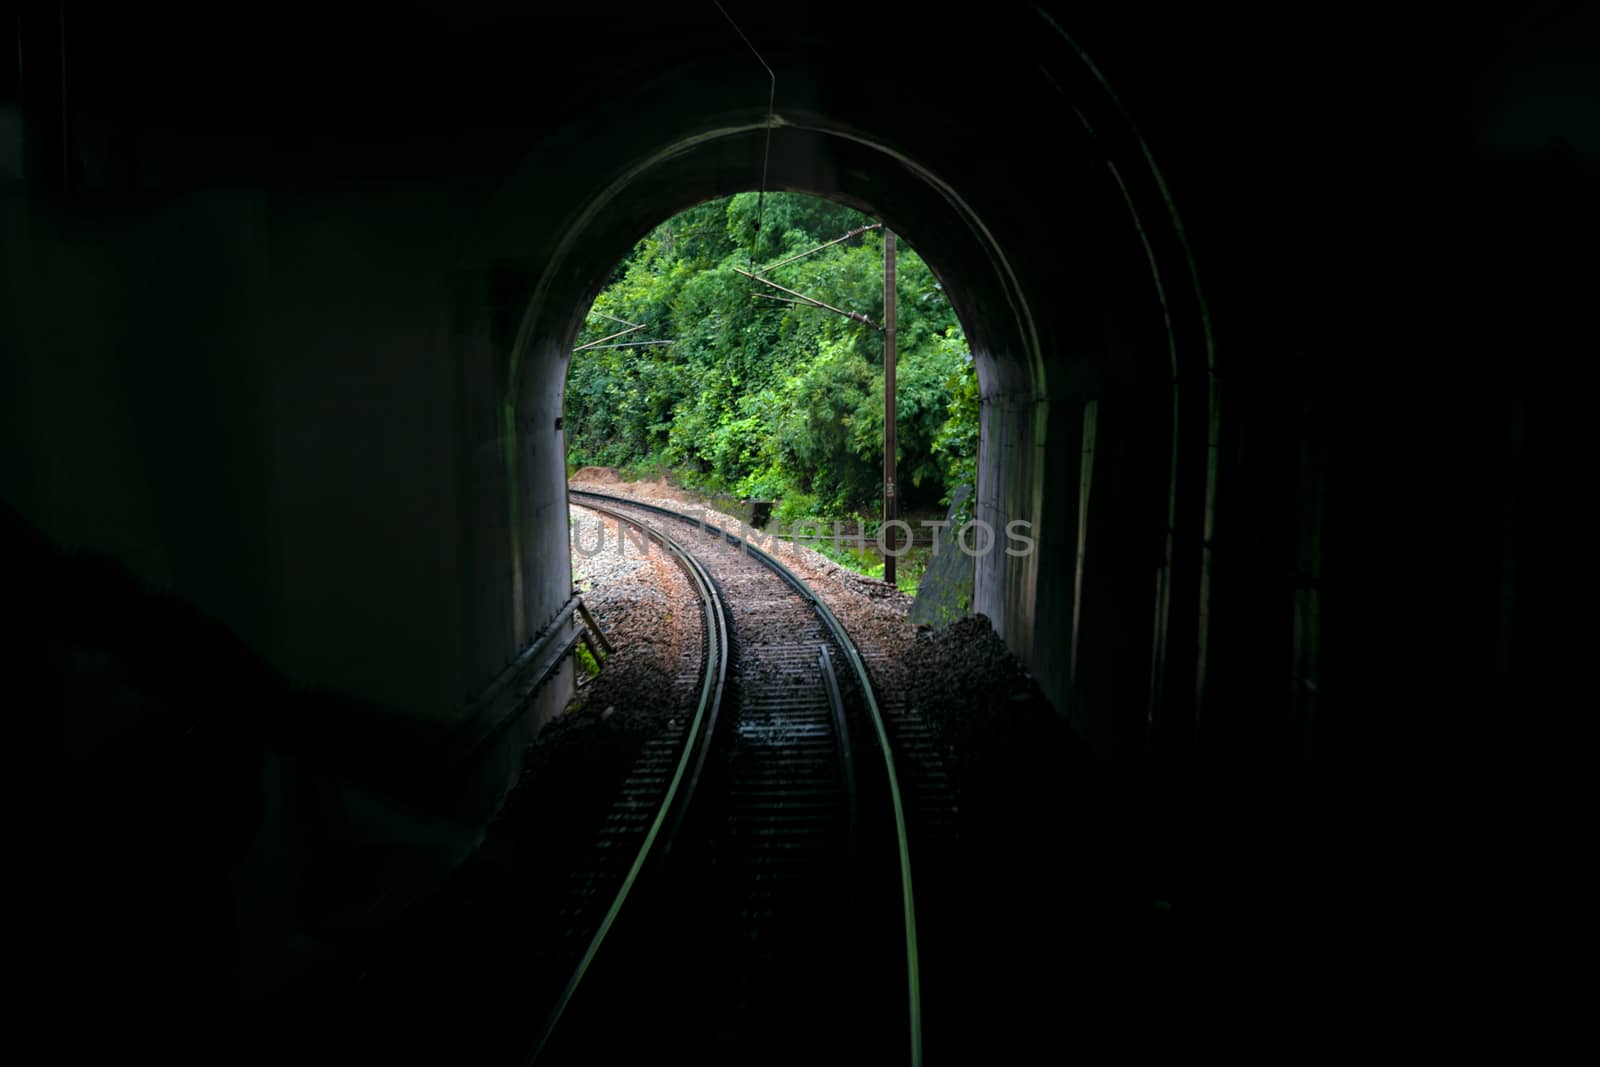 Image taken from vistadome tourist coach of a tunnel portal with railway line.